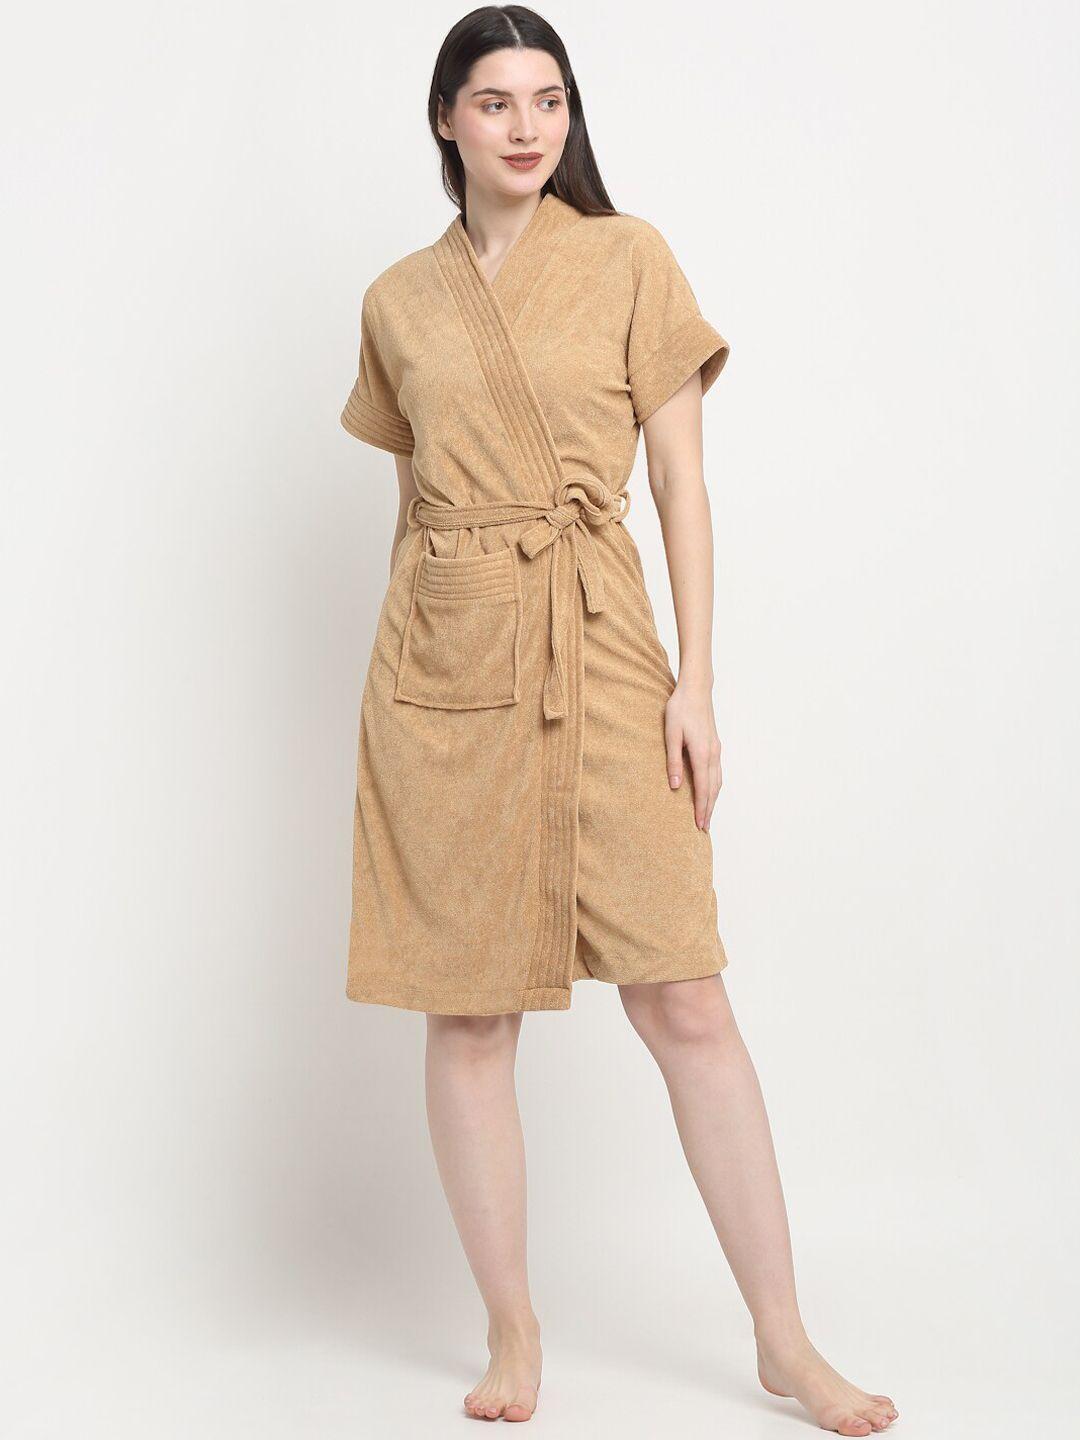 creeva rust everyday collection brown front pocket bath robe